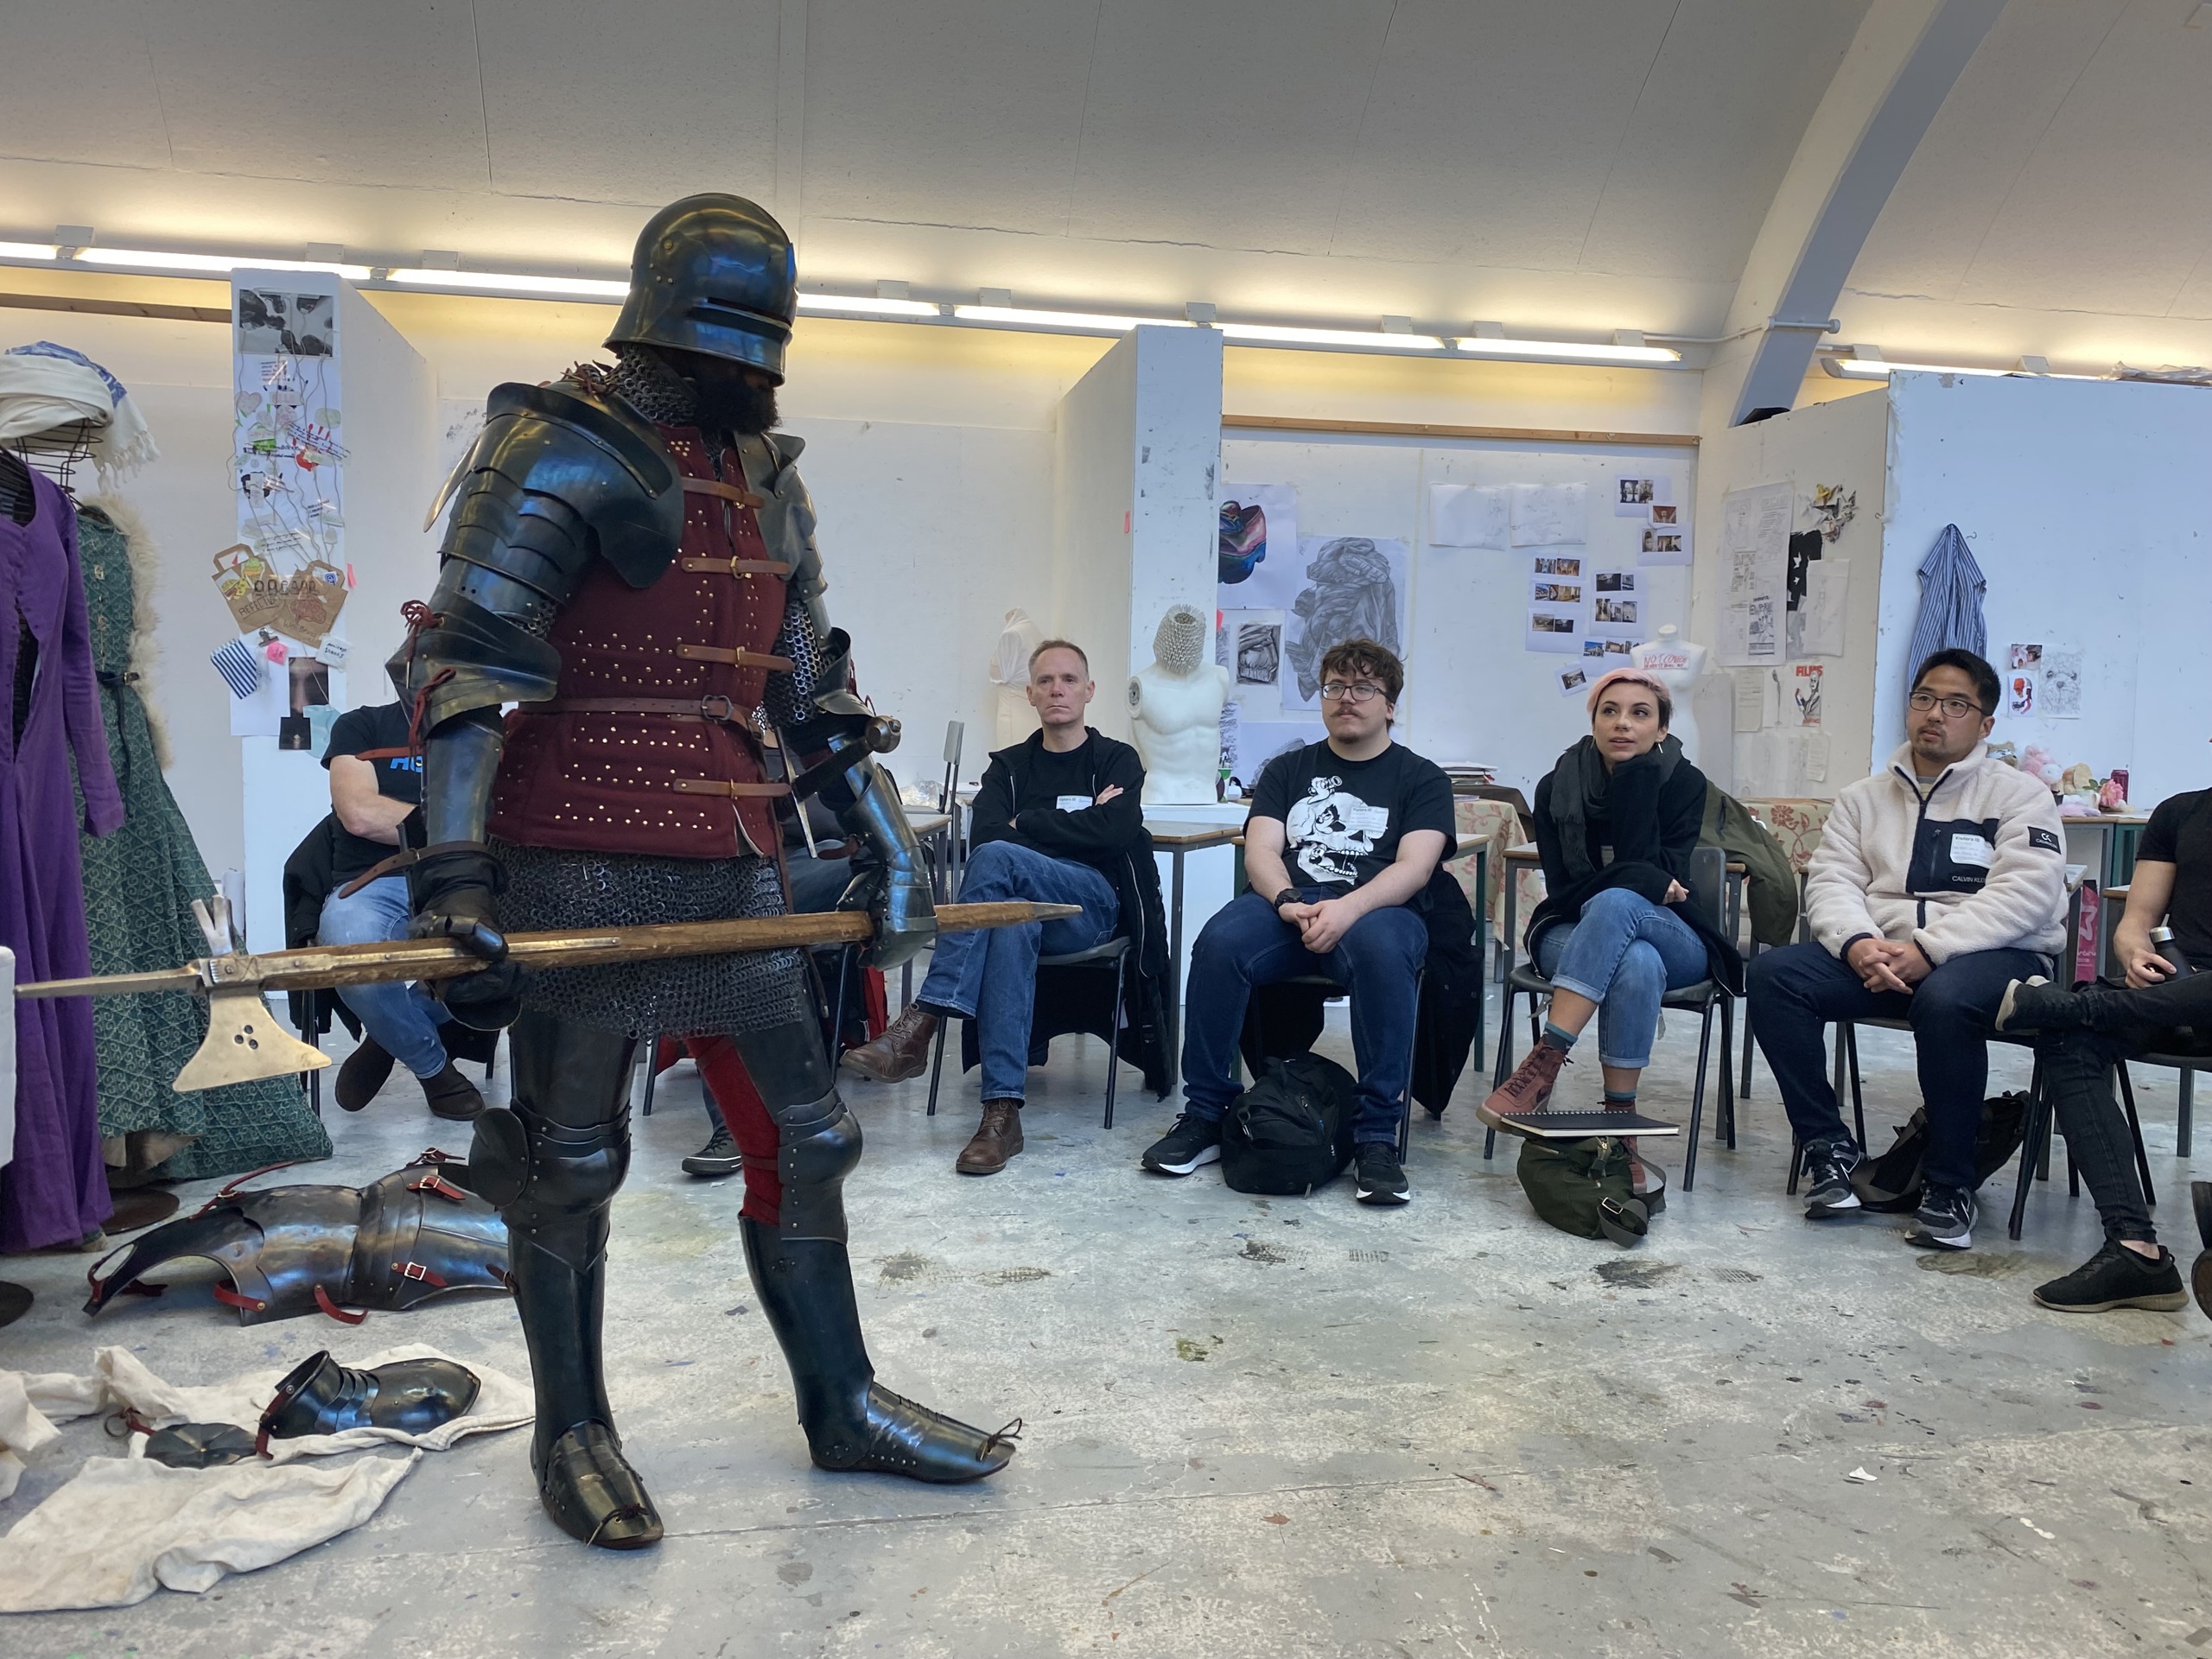 A person wearing medieval armour standing in the middle of an art studio, surrounded by artists